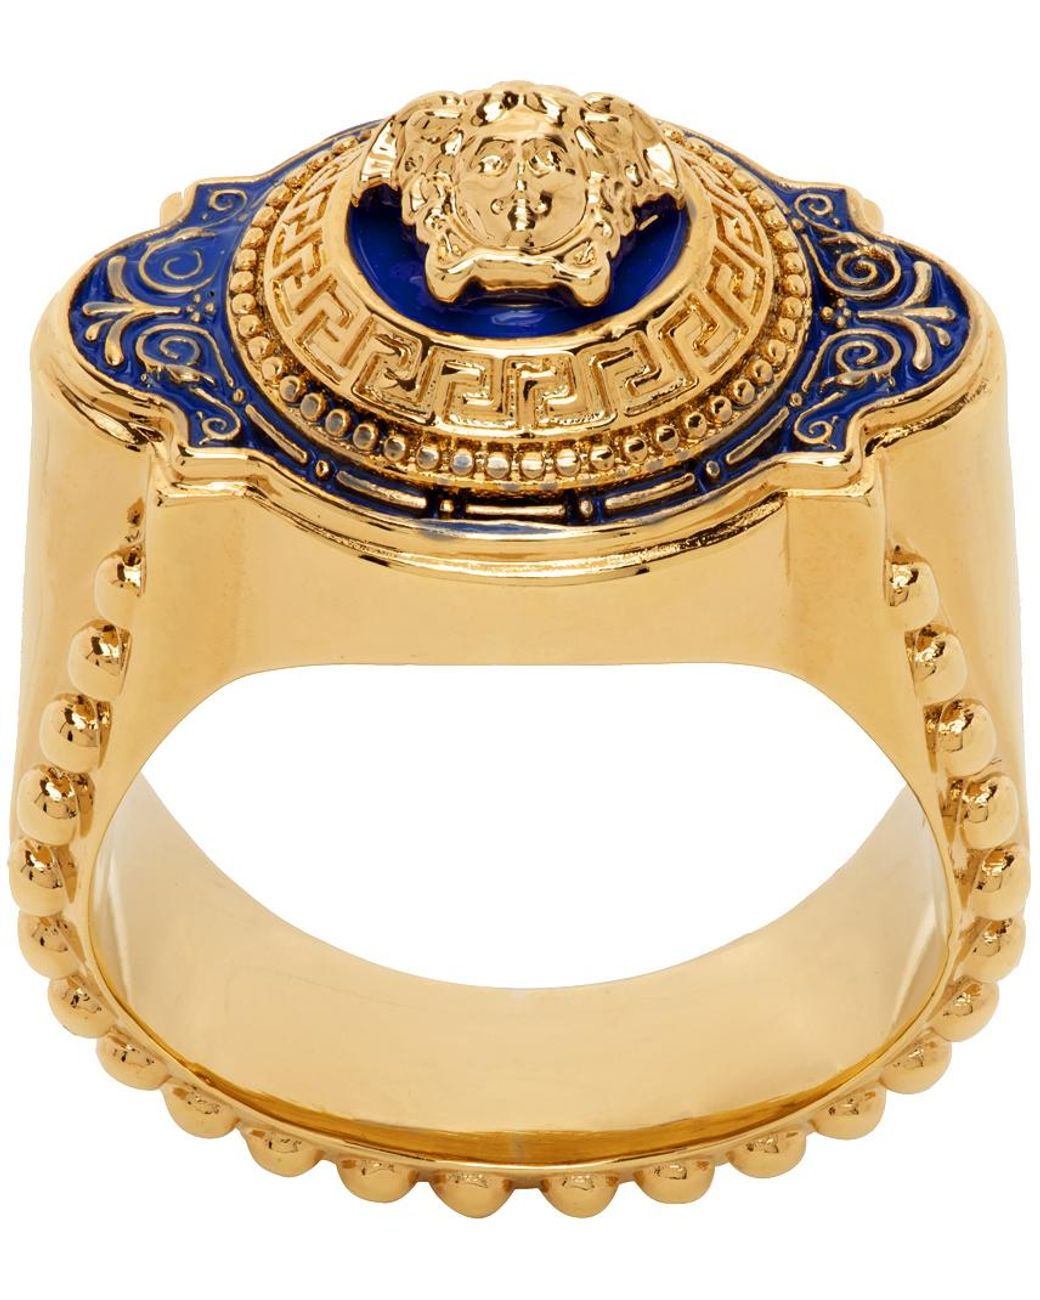 Gianni Versace Gold Ring - 11 For Sale on 1stDibs | versace gold ring 18k  price, versace 18k gold ring, 18k gold versace ring